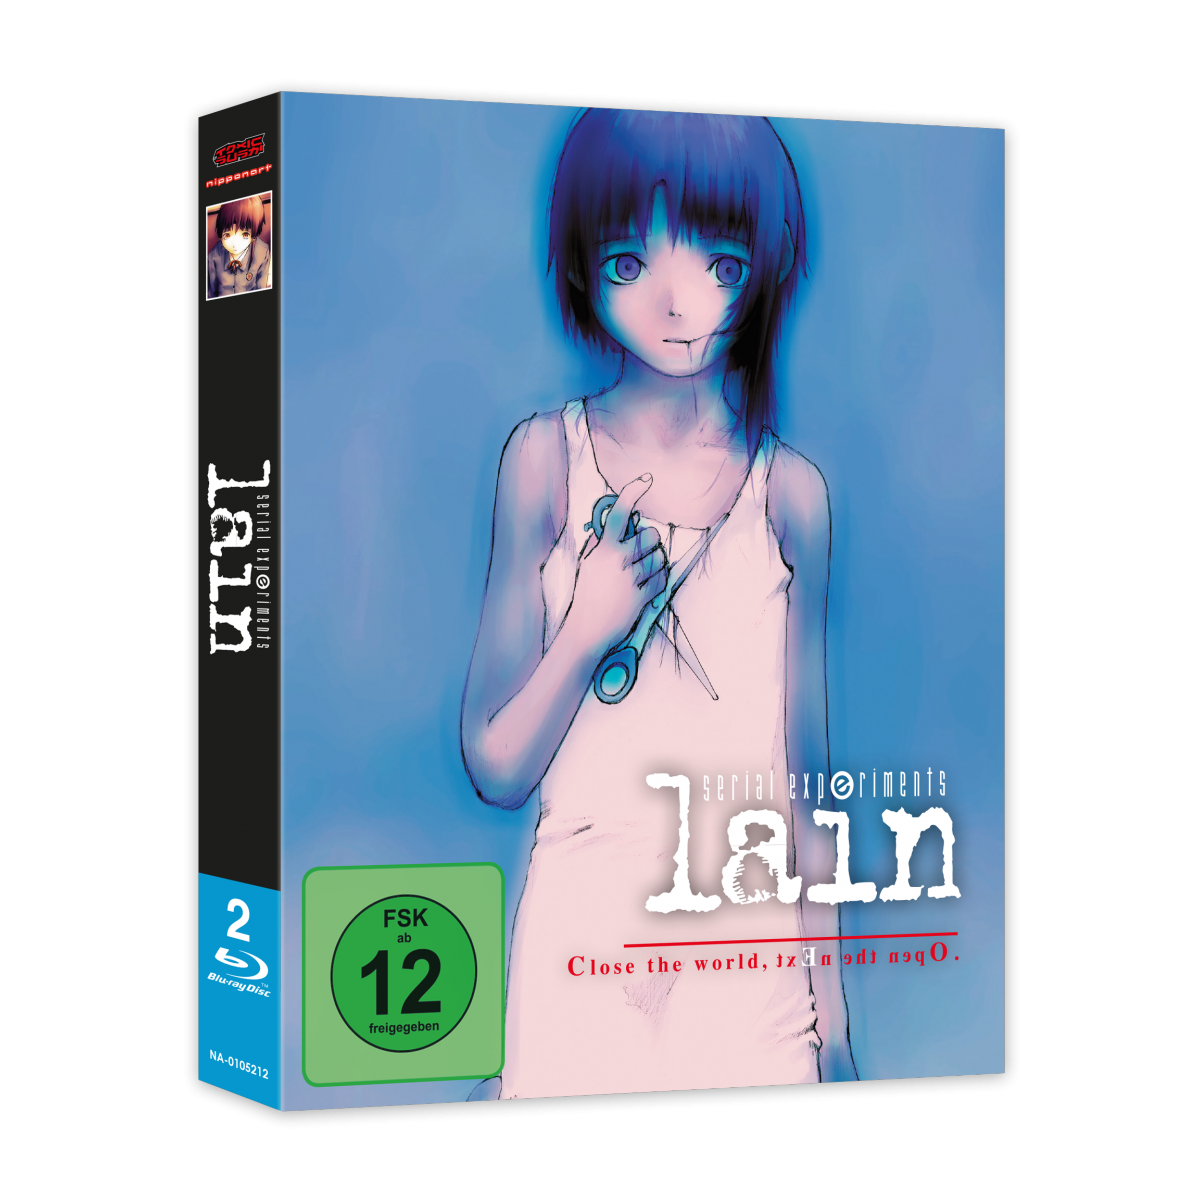 Serial-Experiments-Lain-Gesamtausgabe-Blu-ray-35.png